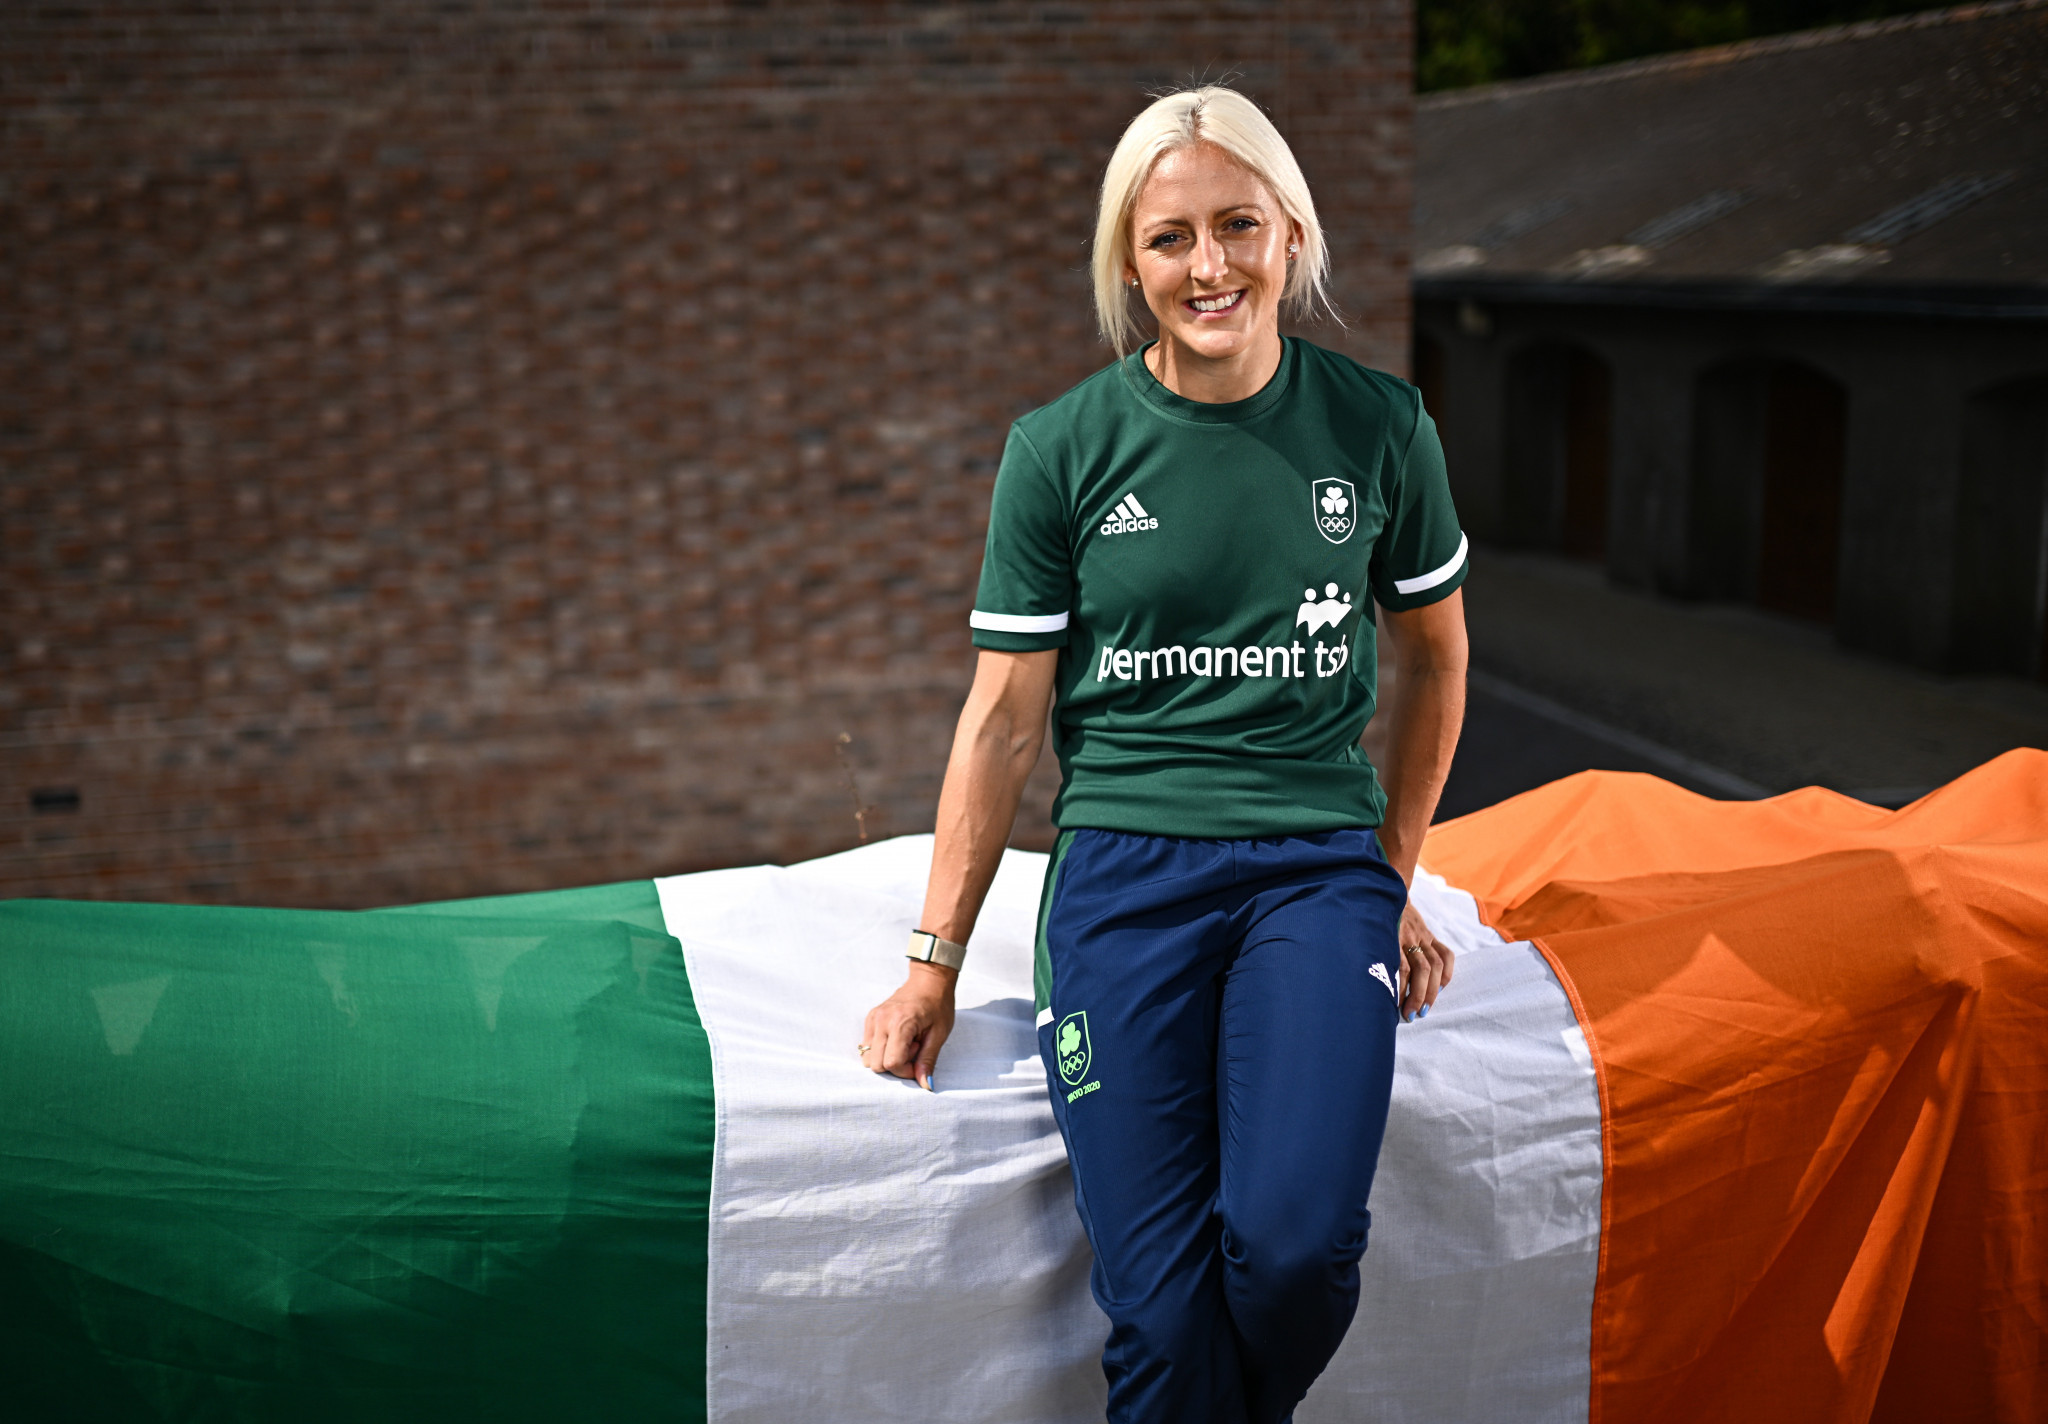 Ireland names team of 121 for European Games with Lavin and Jegou as flagbearers